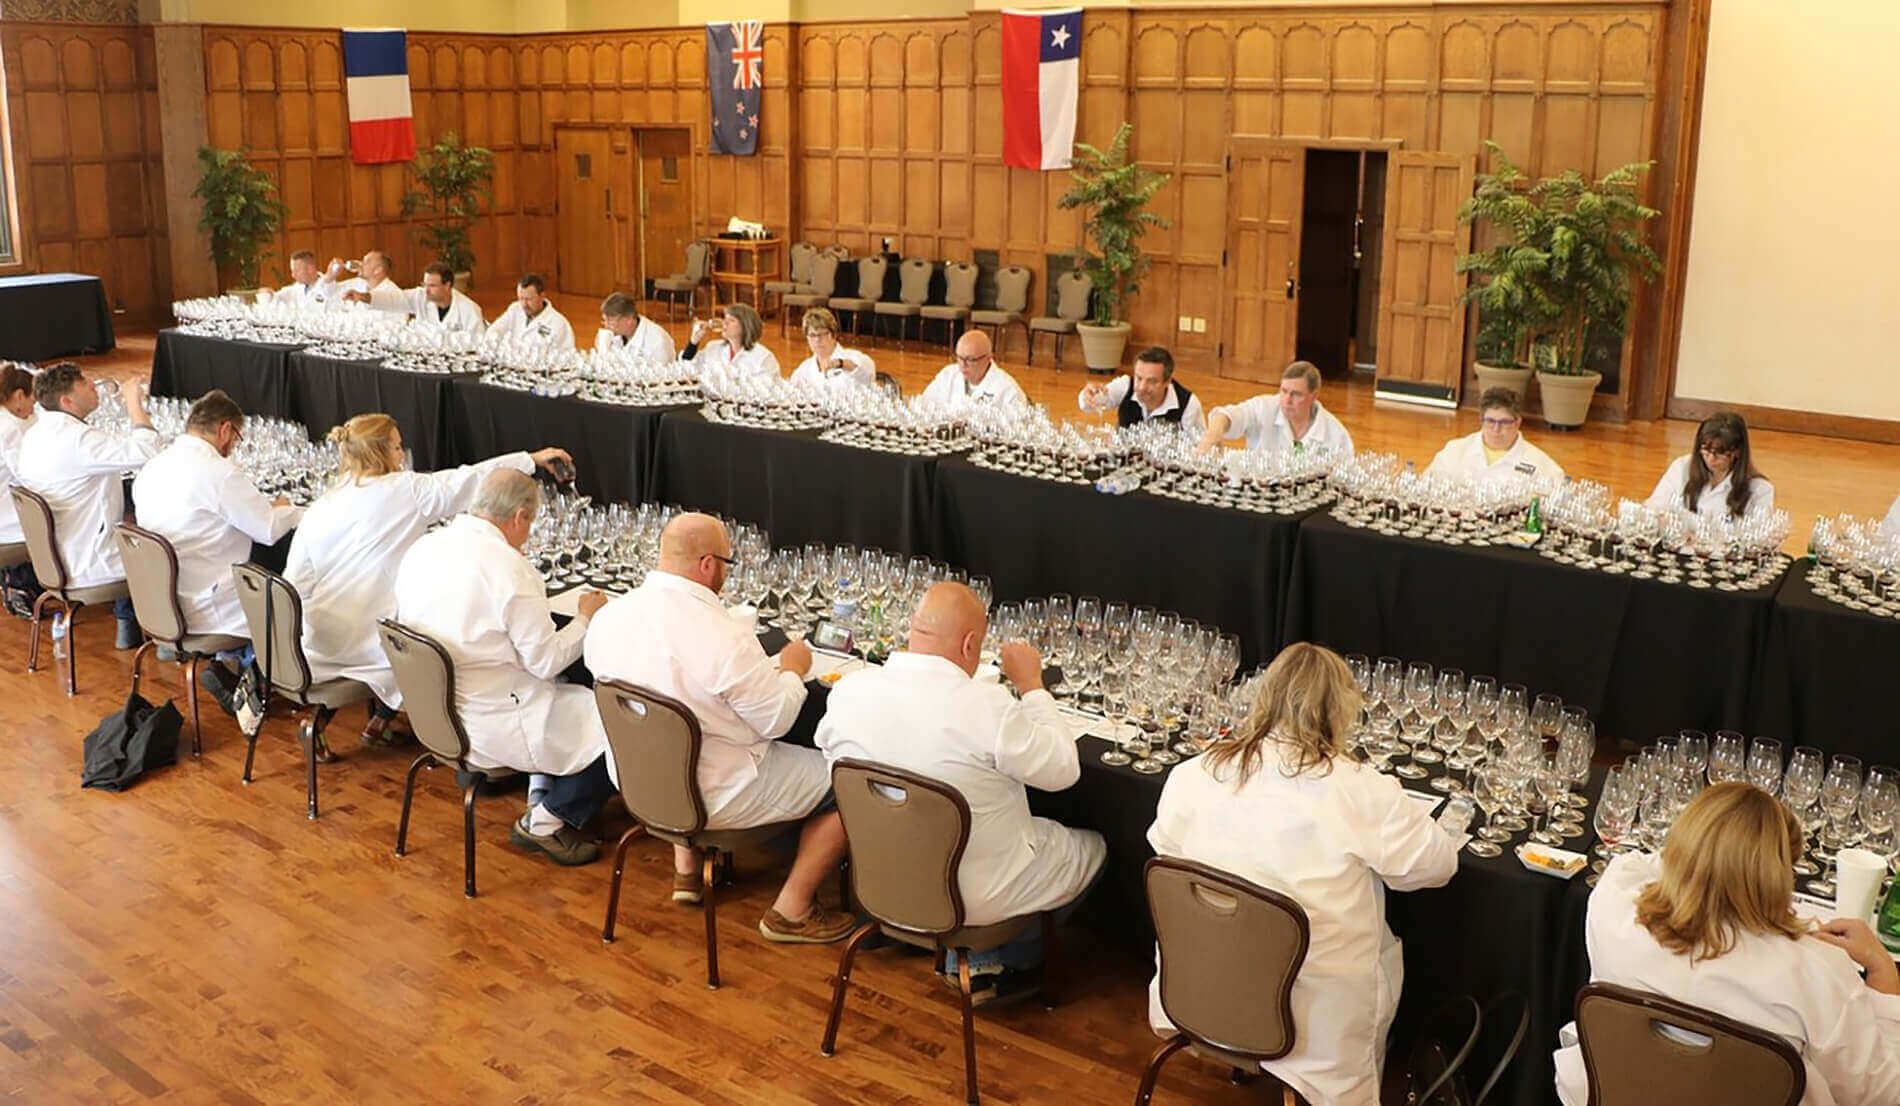 The Purdue Wine Grape Team will host the 28th annual INDY International Wine Competition on May 22-23 in the Purdue Memorial Union ballrooms.